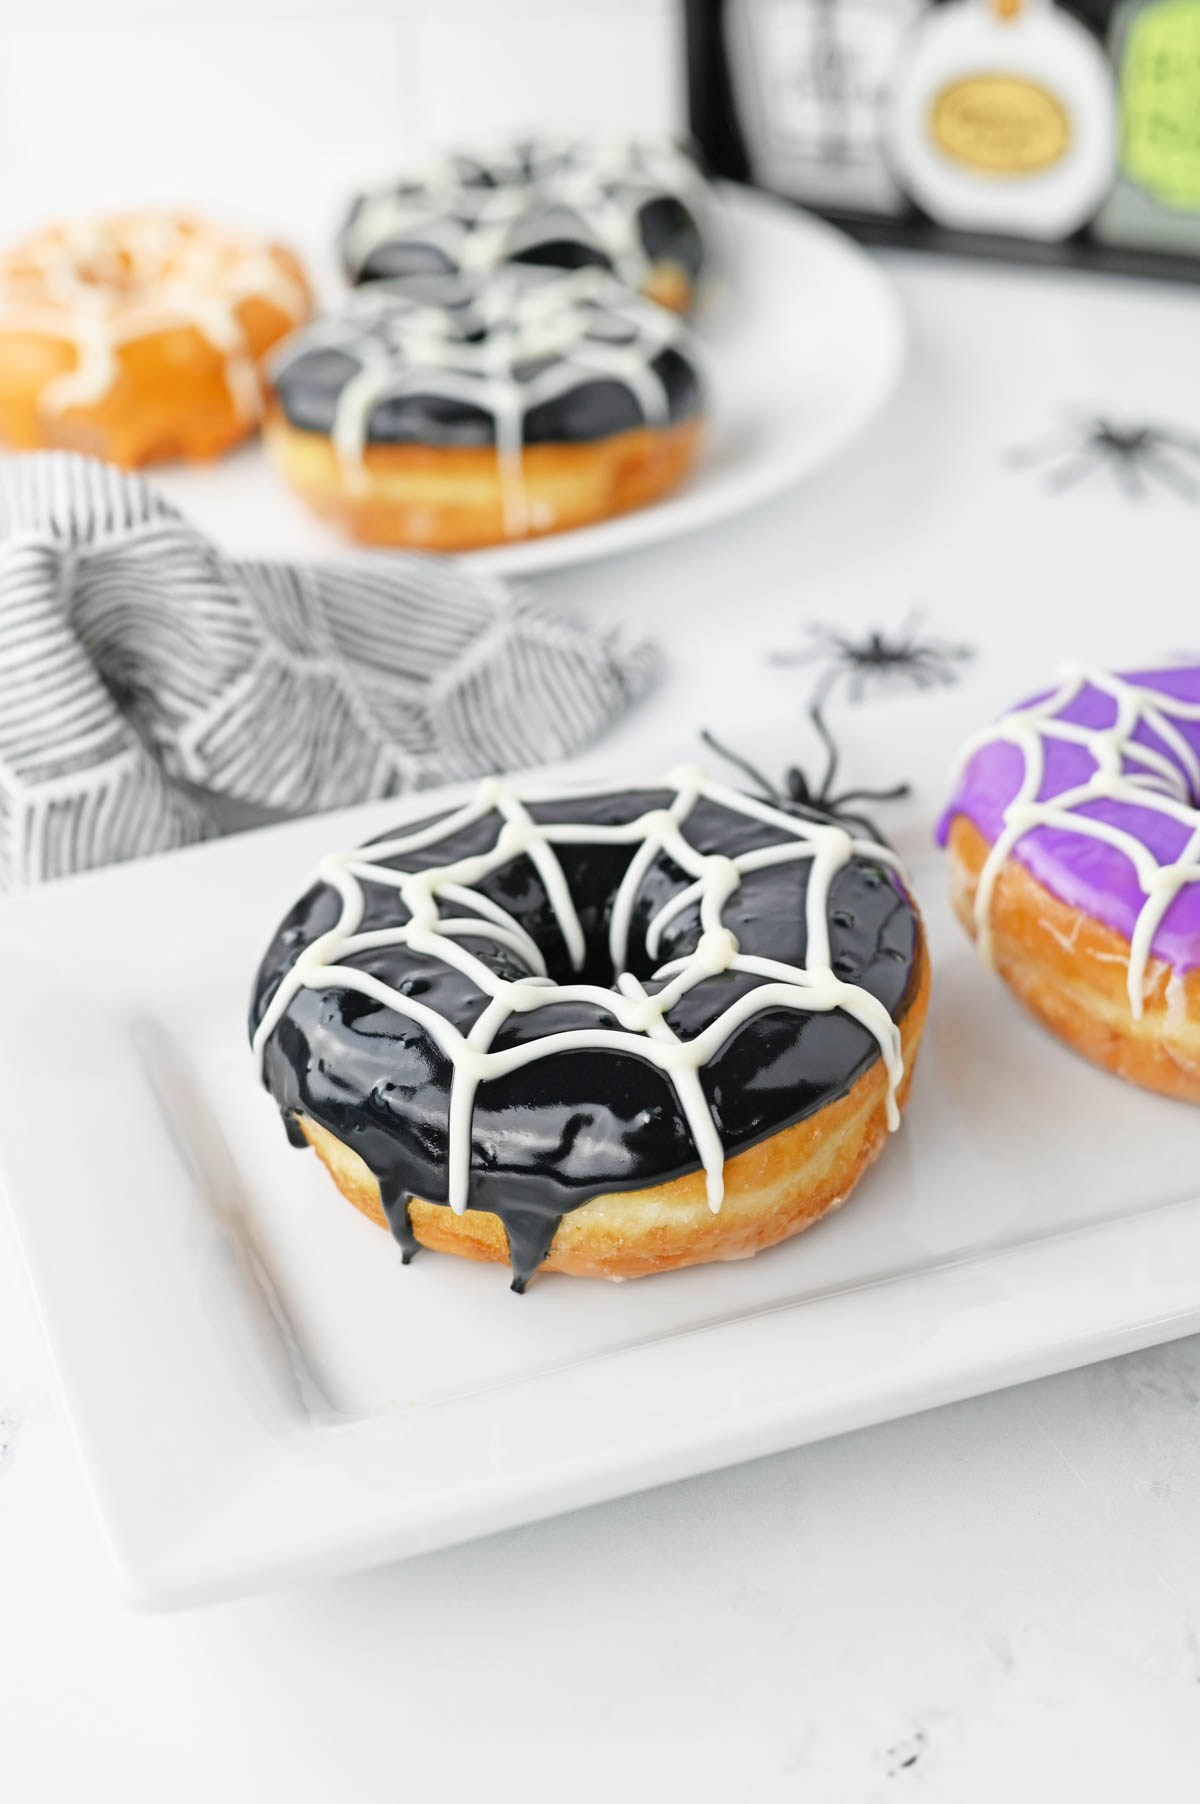 Halloween donut with black icing and white chocolate spiderweb